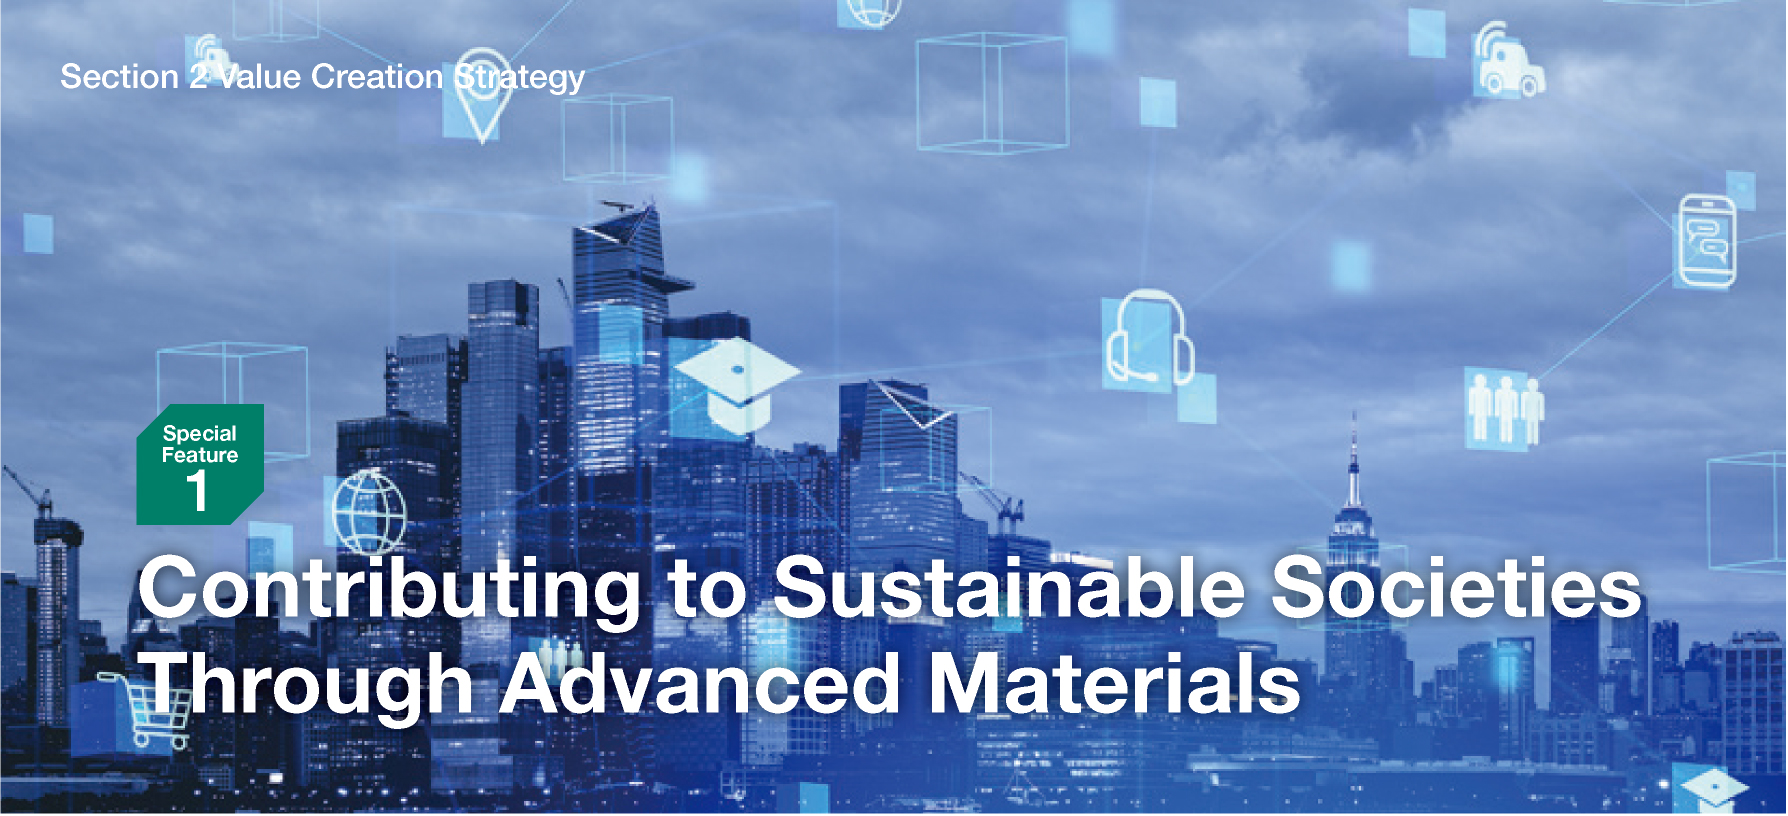 Special Feature 1 Contributing to Sustainable Societies Through Advanced Materials